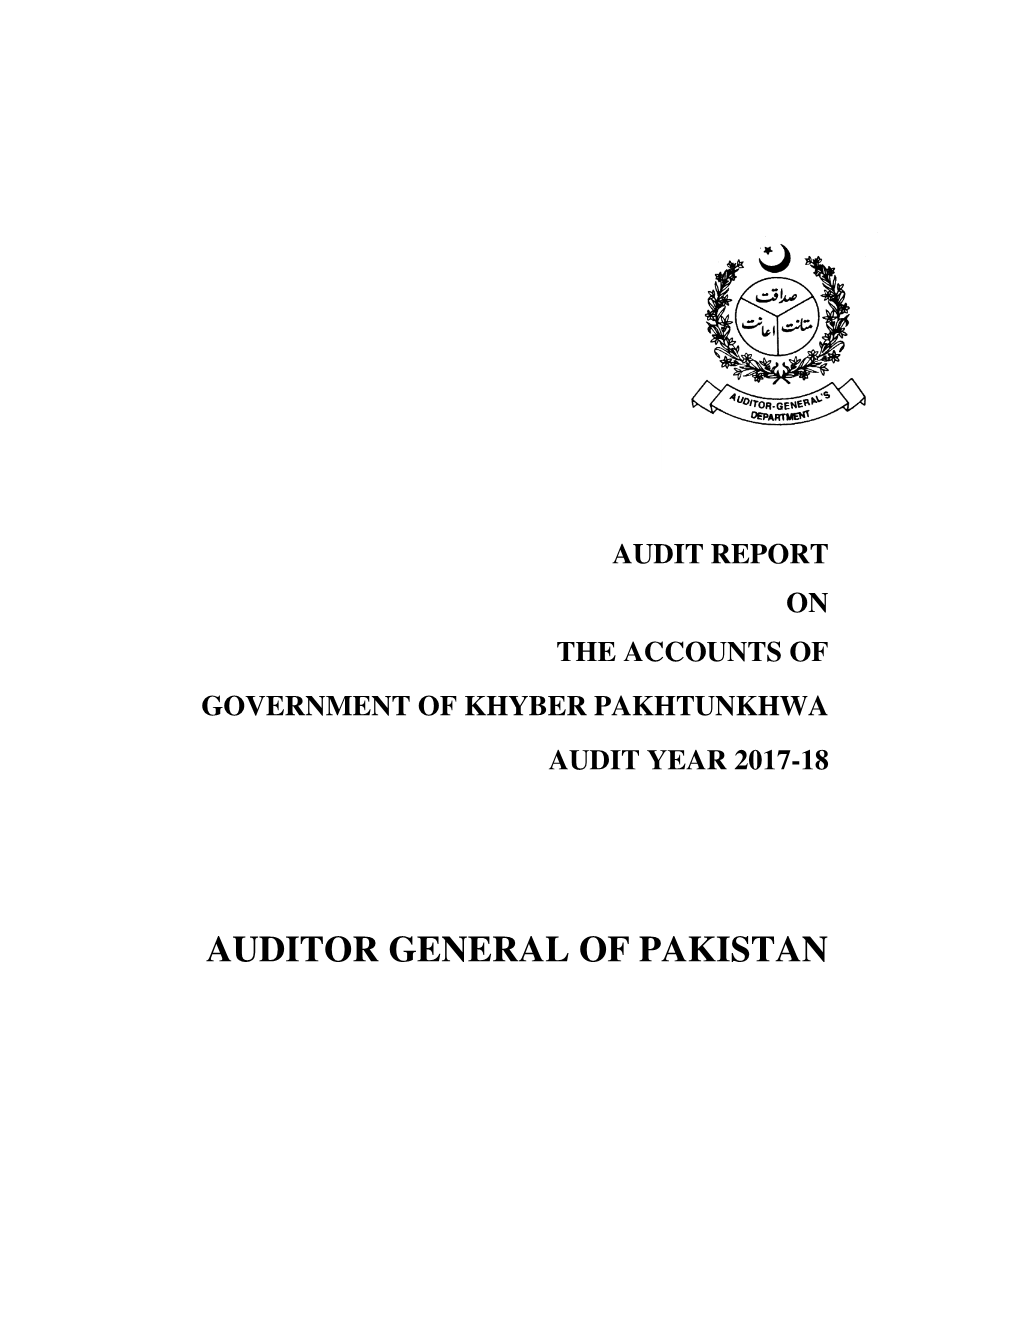 Audit Report on the Accounts of Government of Khyber Pakhtunkhwa Audit Year 2017-18